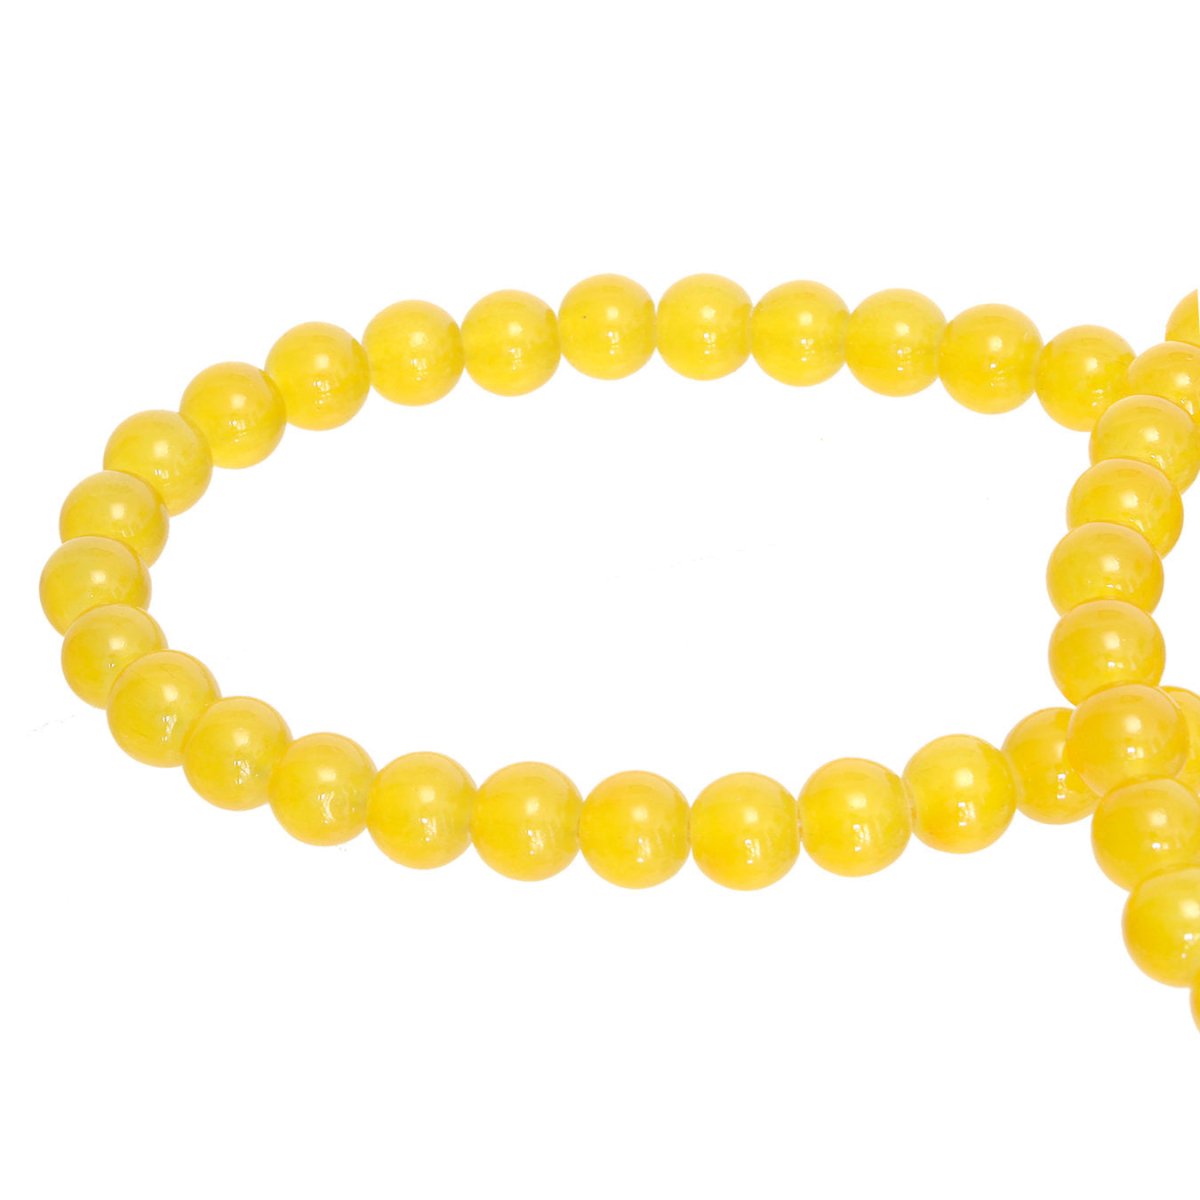 Neon Yellow Round Glass Beads, Size 6 mm, 8 mm, 10 mm Hole size 1.2 mm, Full Bead Strand, Bead Making, Jewelry Making, Necklace Bracelet DIY, Harris 1889 - DLUXCA